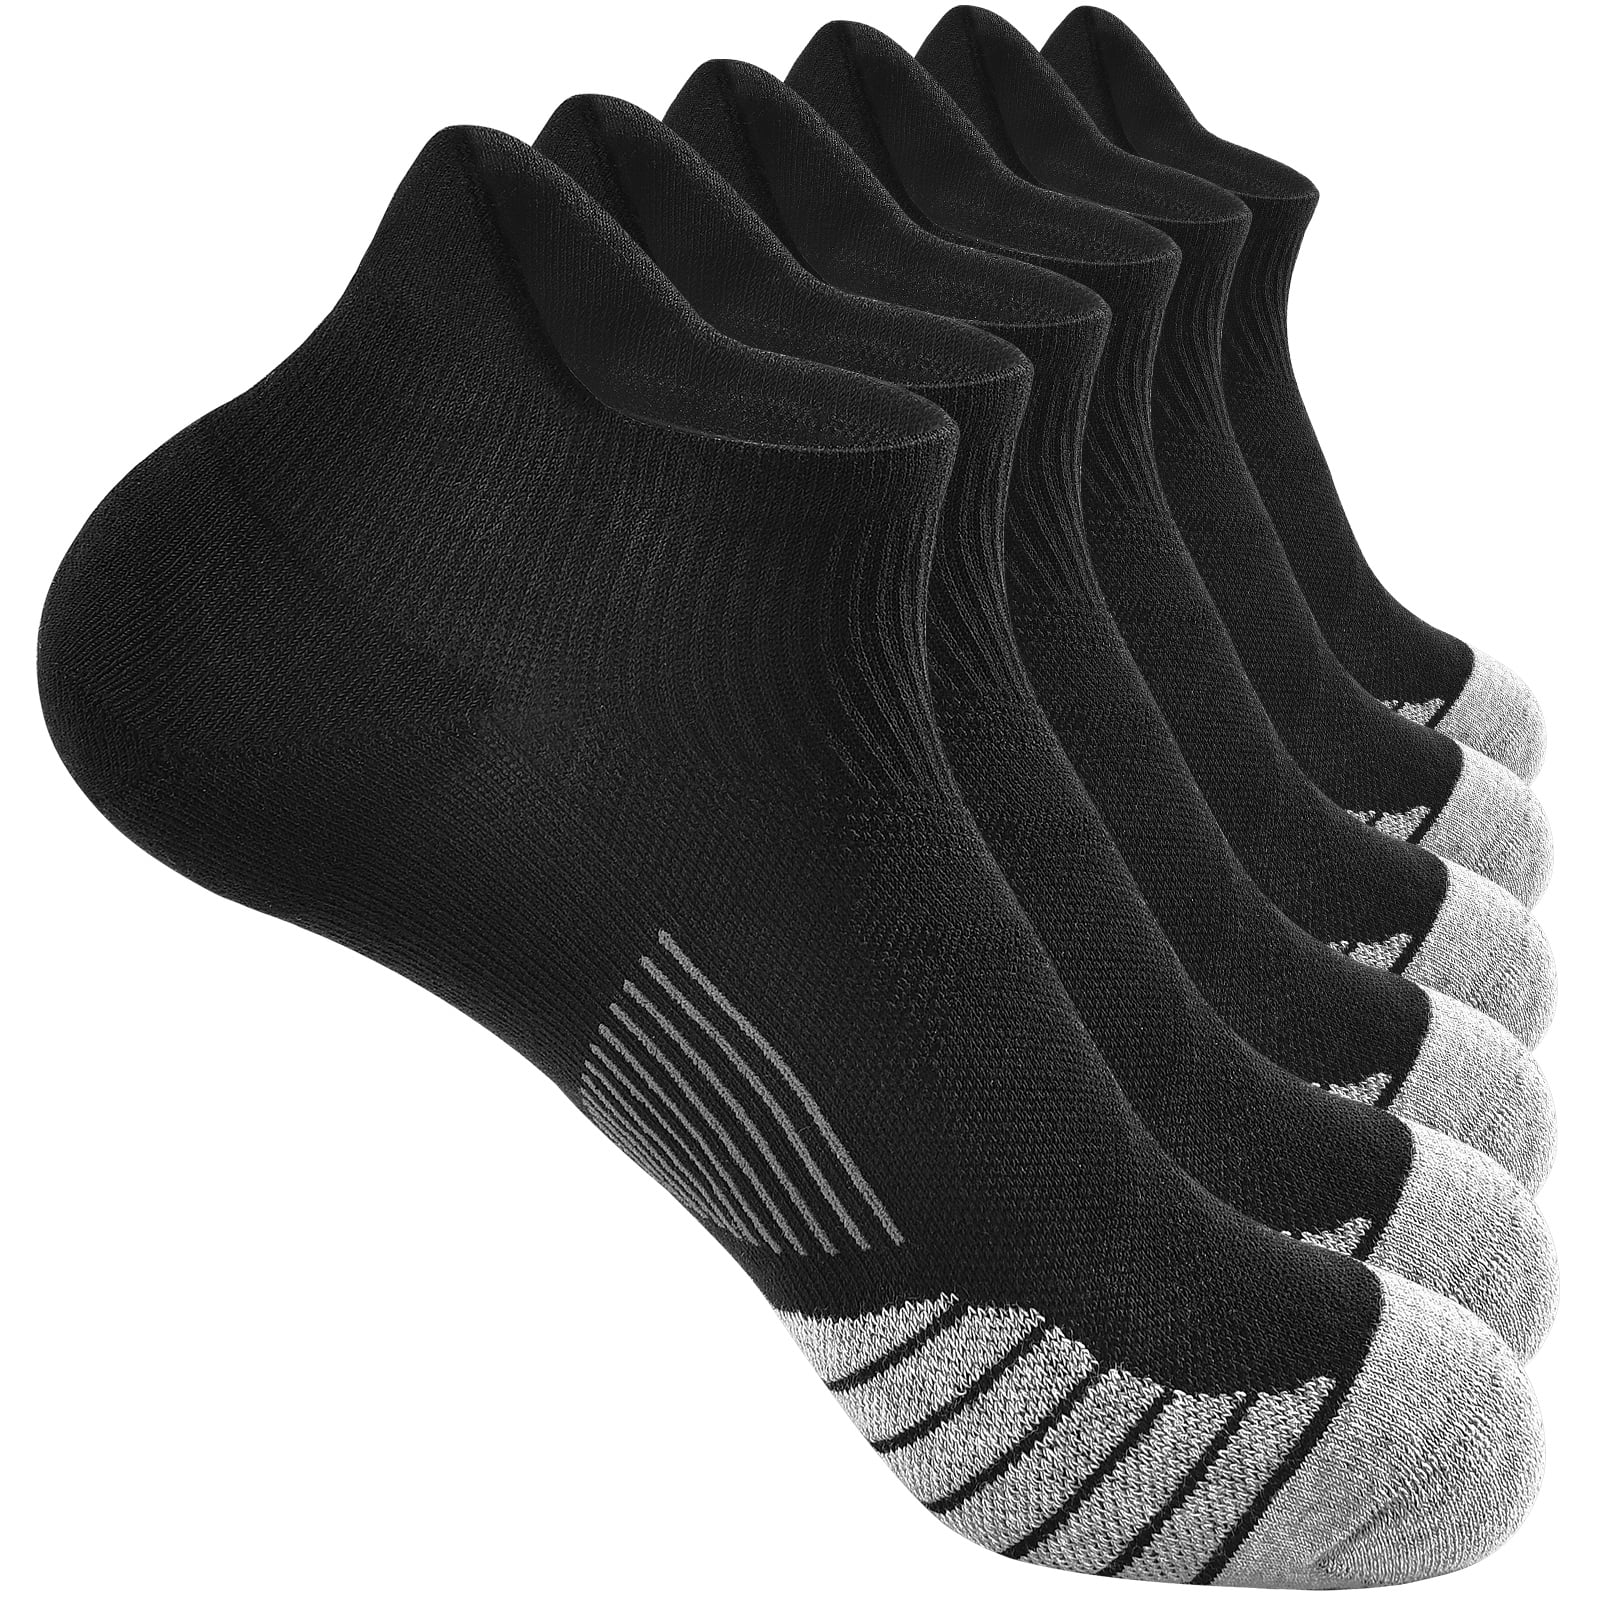 Padded Terry ​Sole 6 Pairs of ​Cotton Ankle Socks ​for​ Women Athletic ​and​ Low Cut for Running ​and Sports